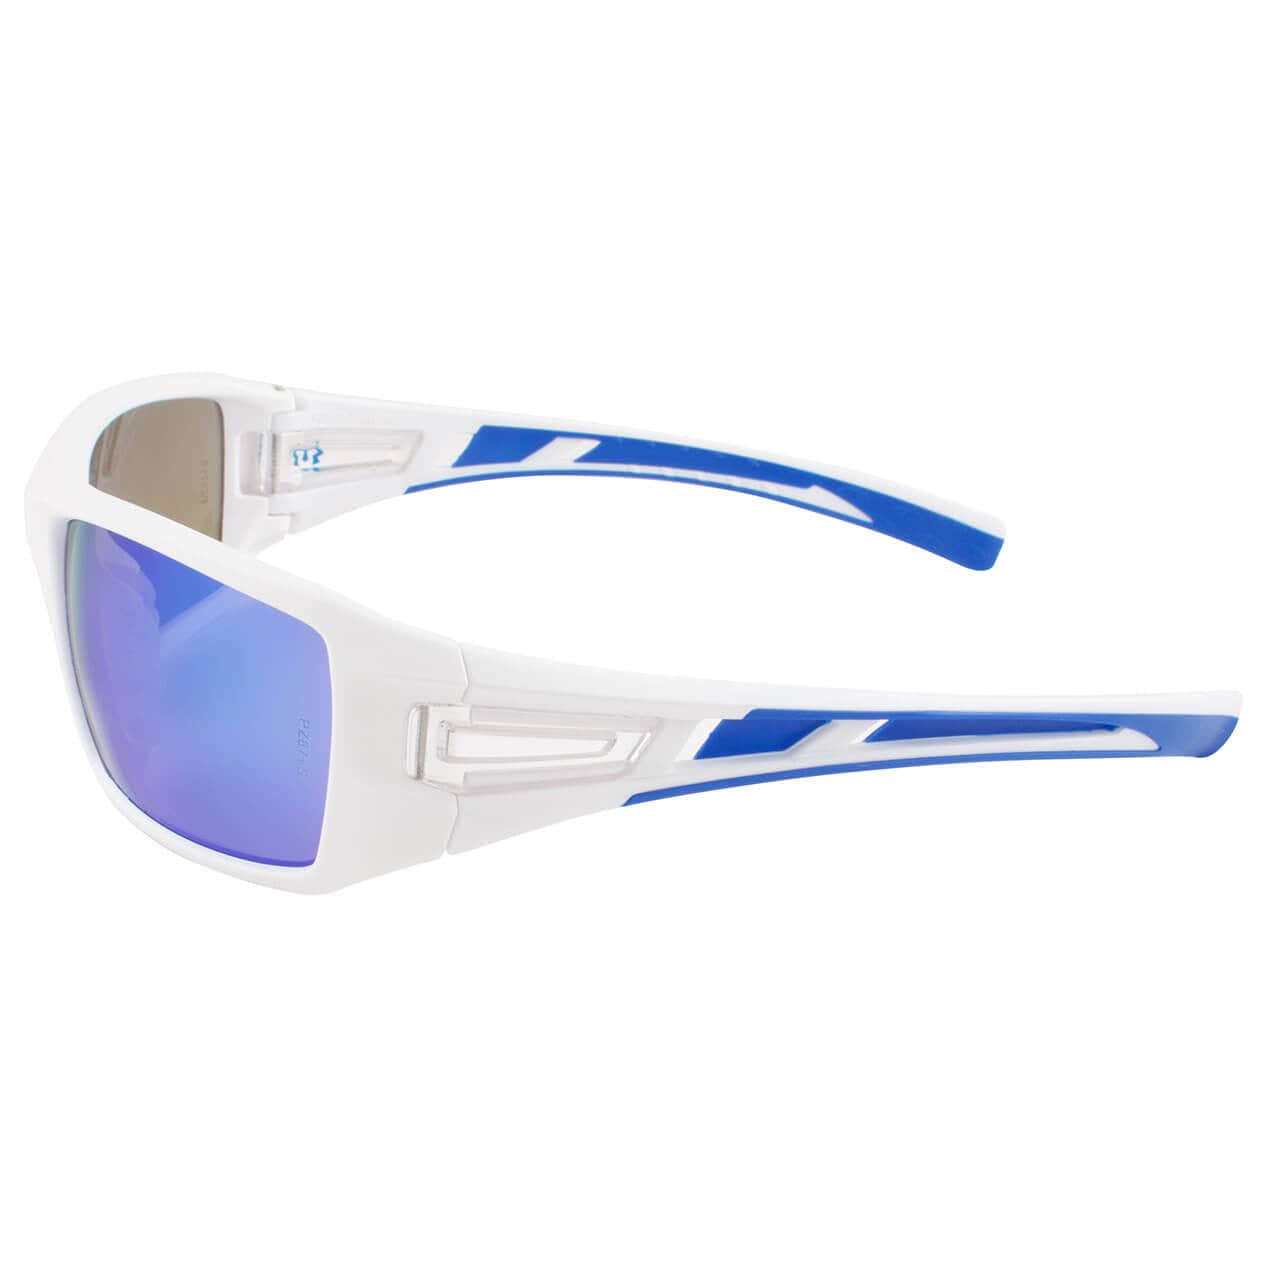 Metel M30 Safety Glasses with White Frame and Blue Mirror Lenses Side View